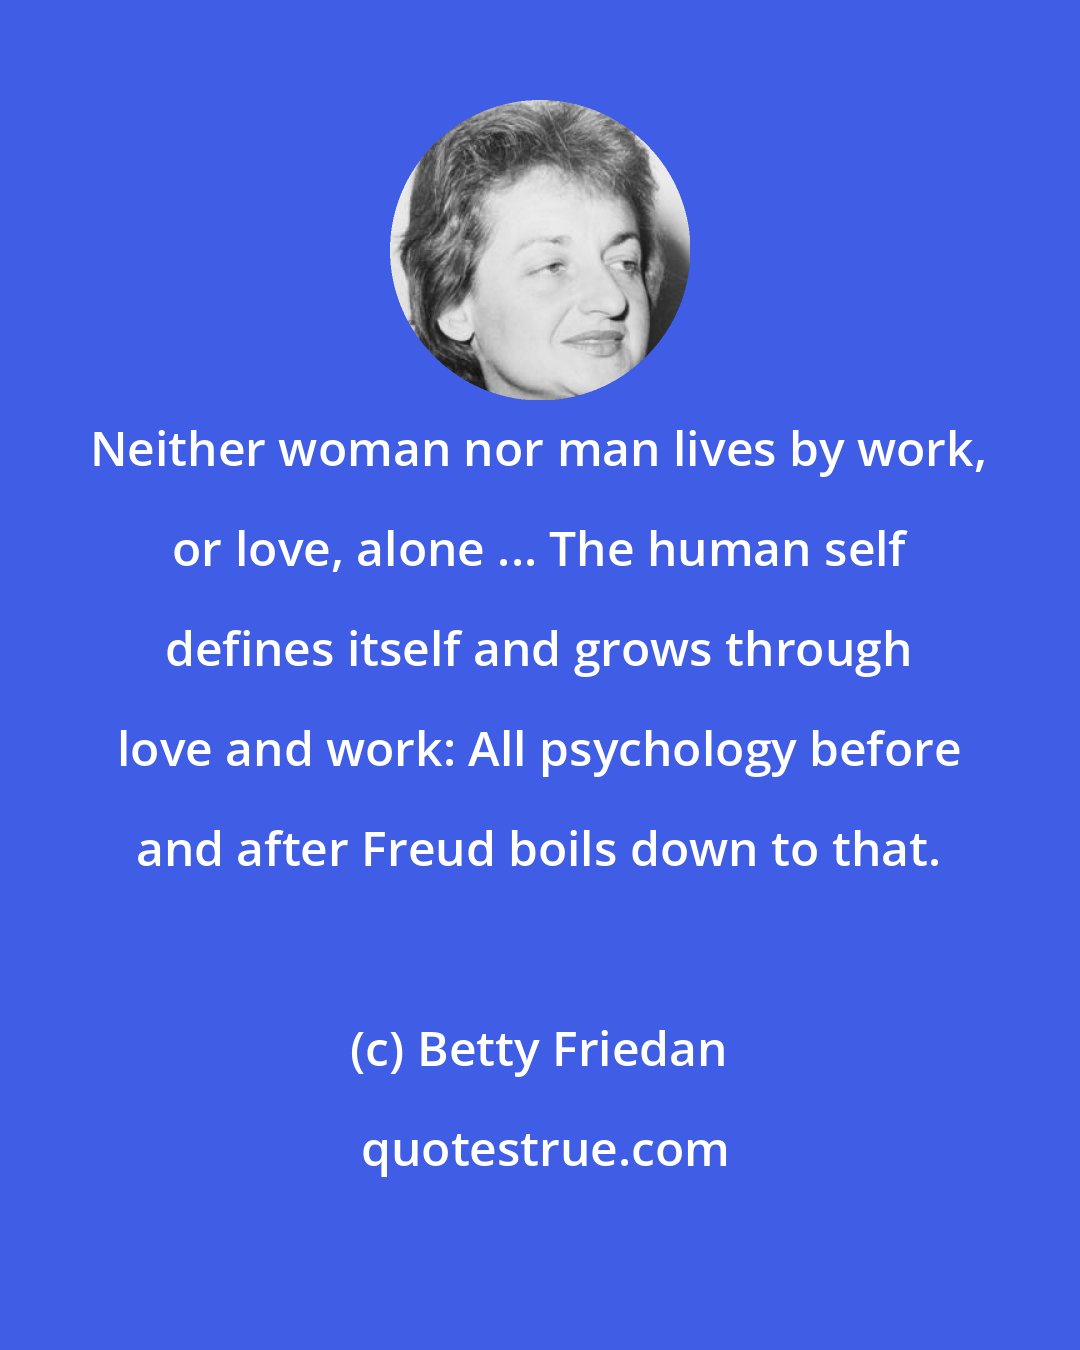 Betty Friedan: Neither woman nor man lives by work, or love, alone ... The human self defines itself and grows through love and work: All psychology before and after Freud boils down to that.